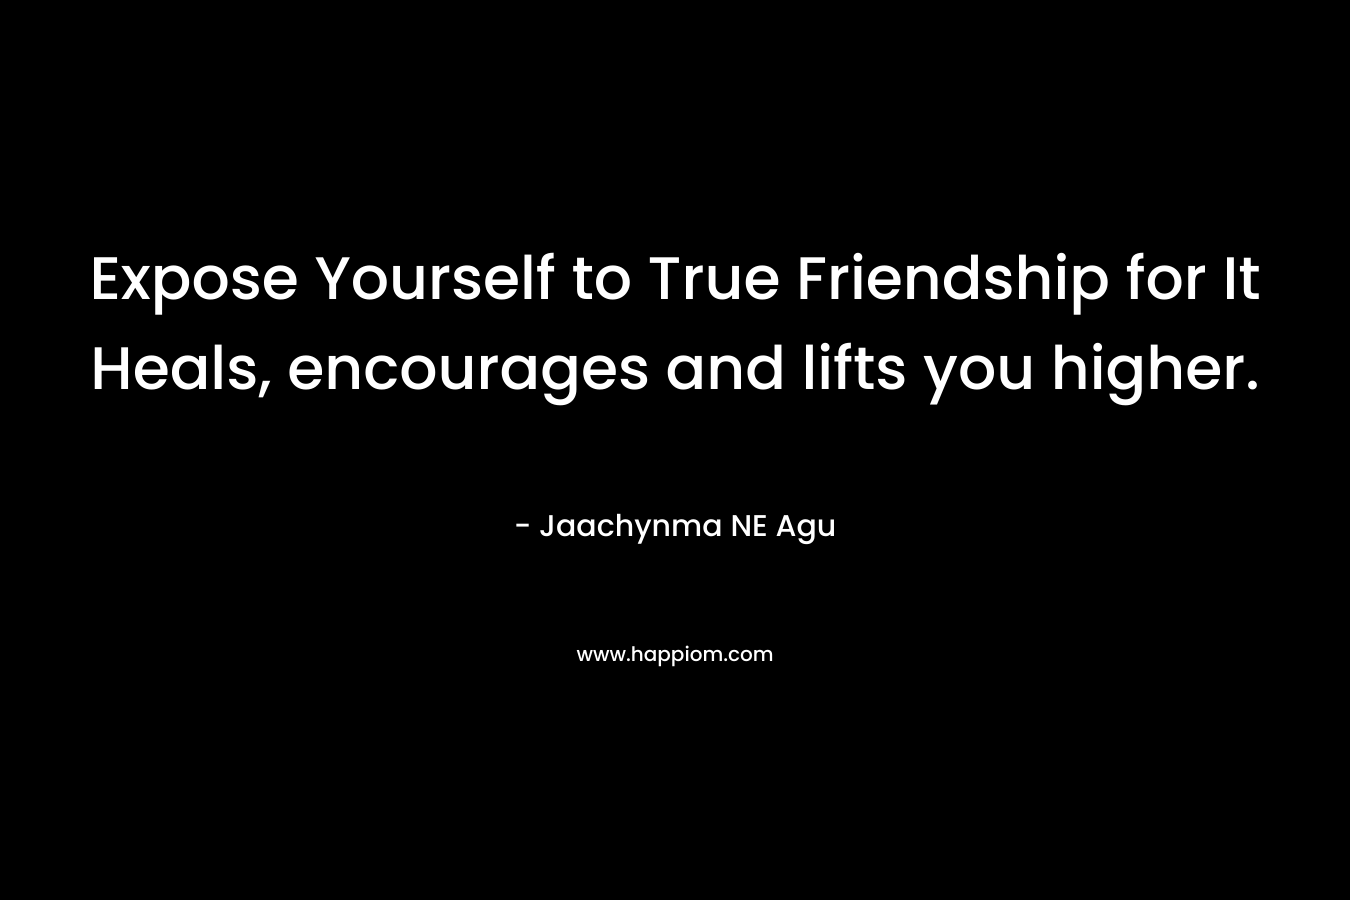 Expose Yourself to True Friendship for It Heals, encourages and lifts you higher.